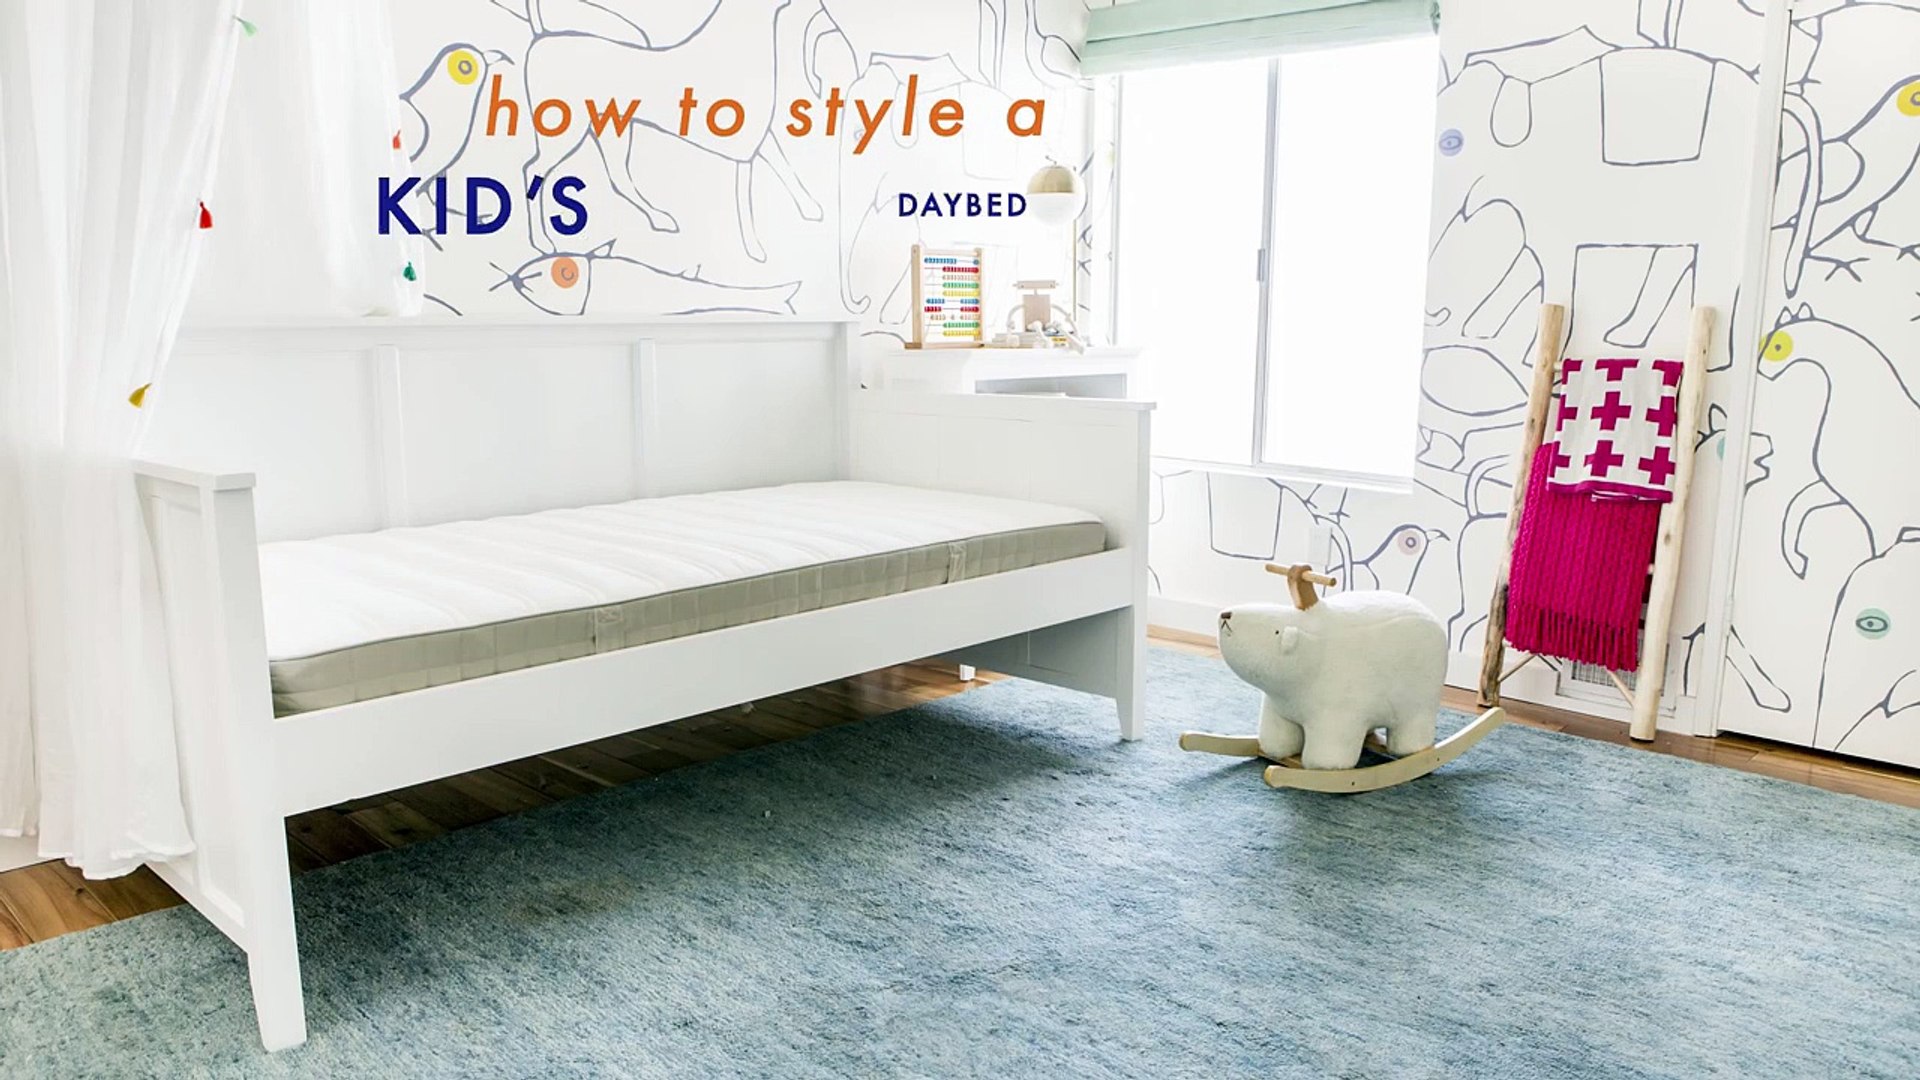 How To Style A Kid's Daybed-7u05Sq0